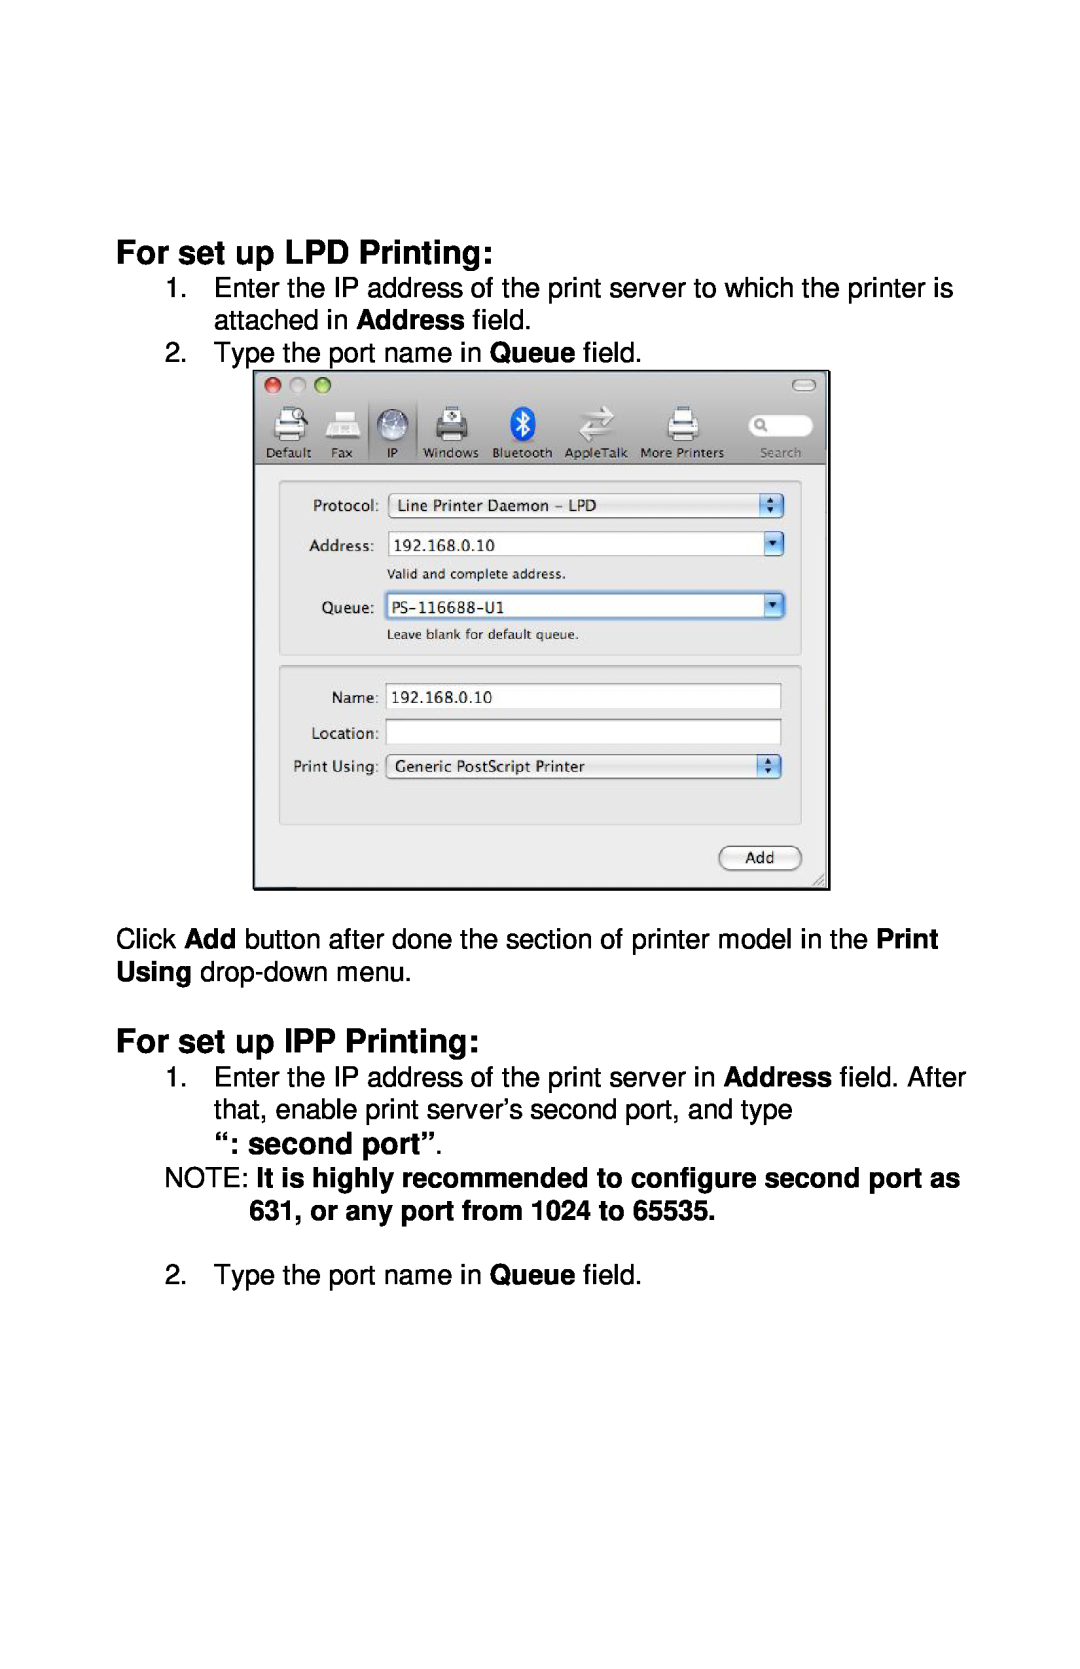 TRENDnet TE100-PIP manual For set up LPD Printing, For set up IPP Printing, “ second port” 